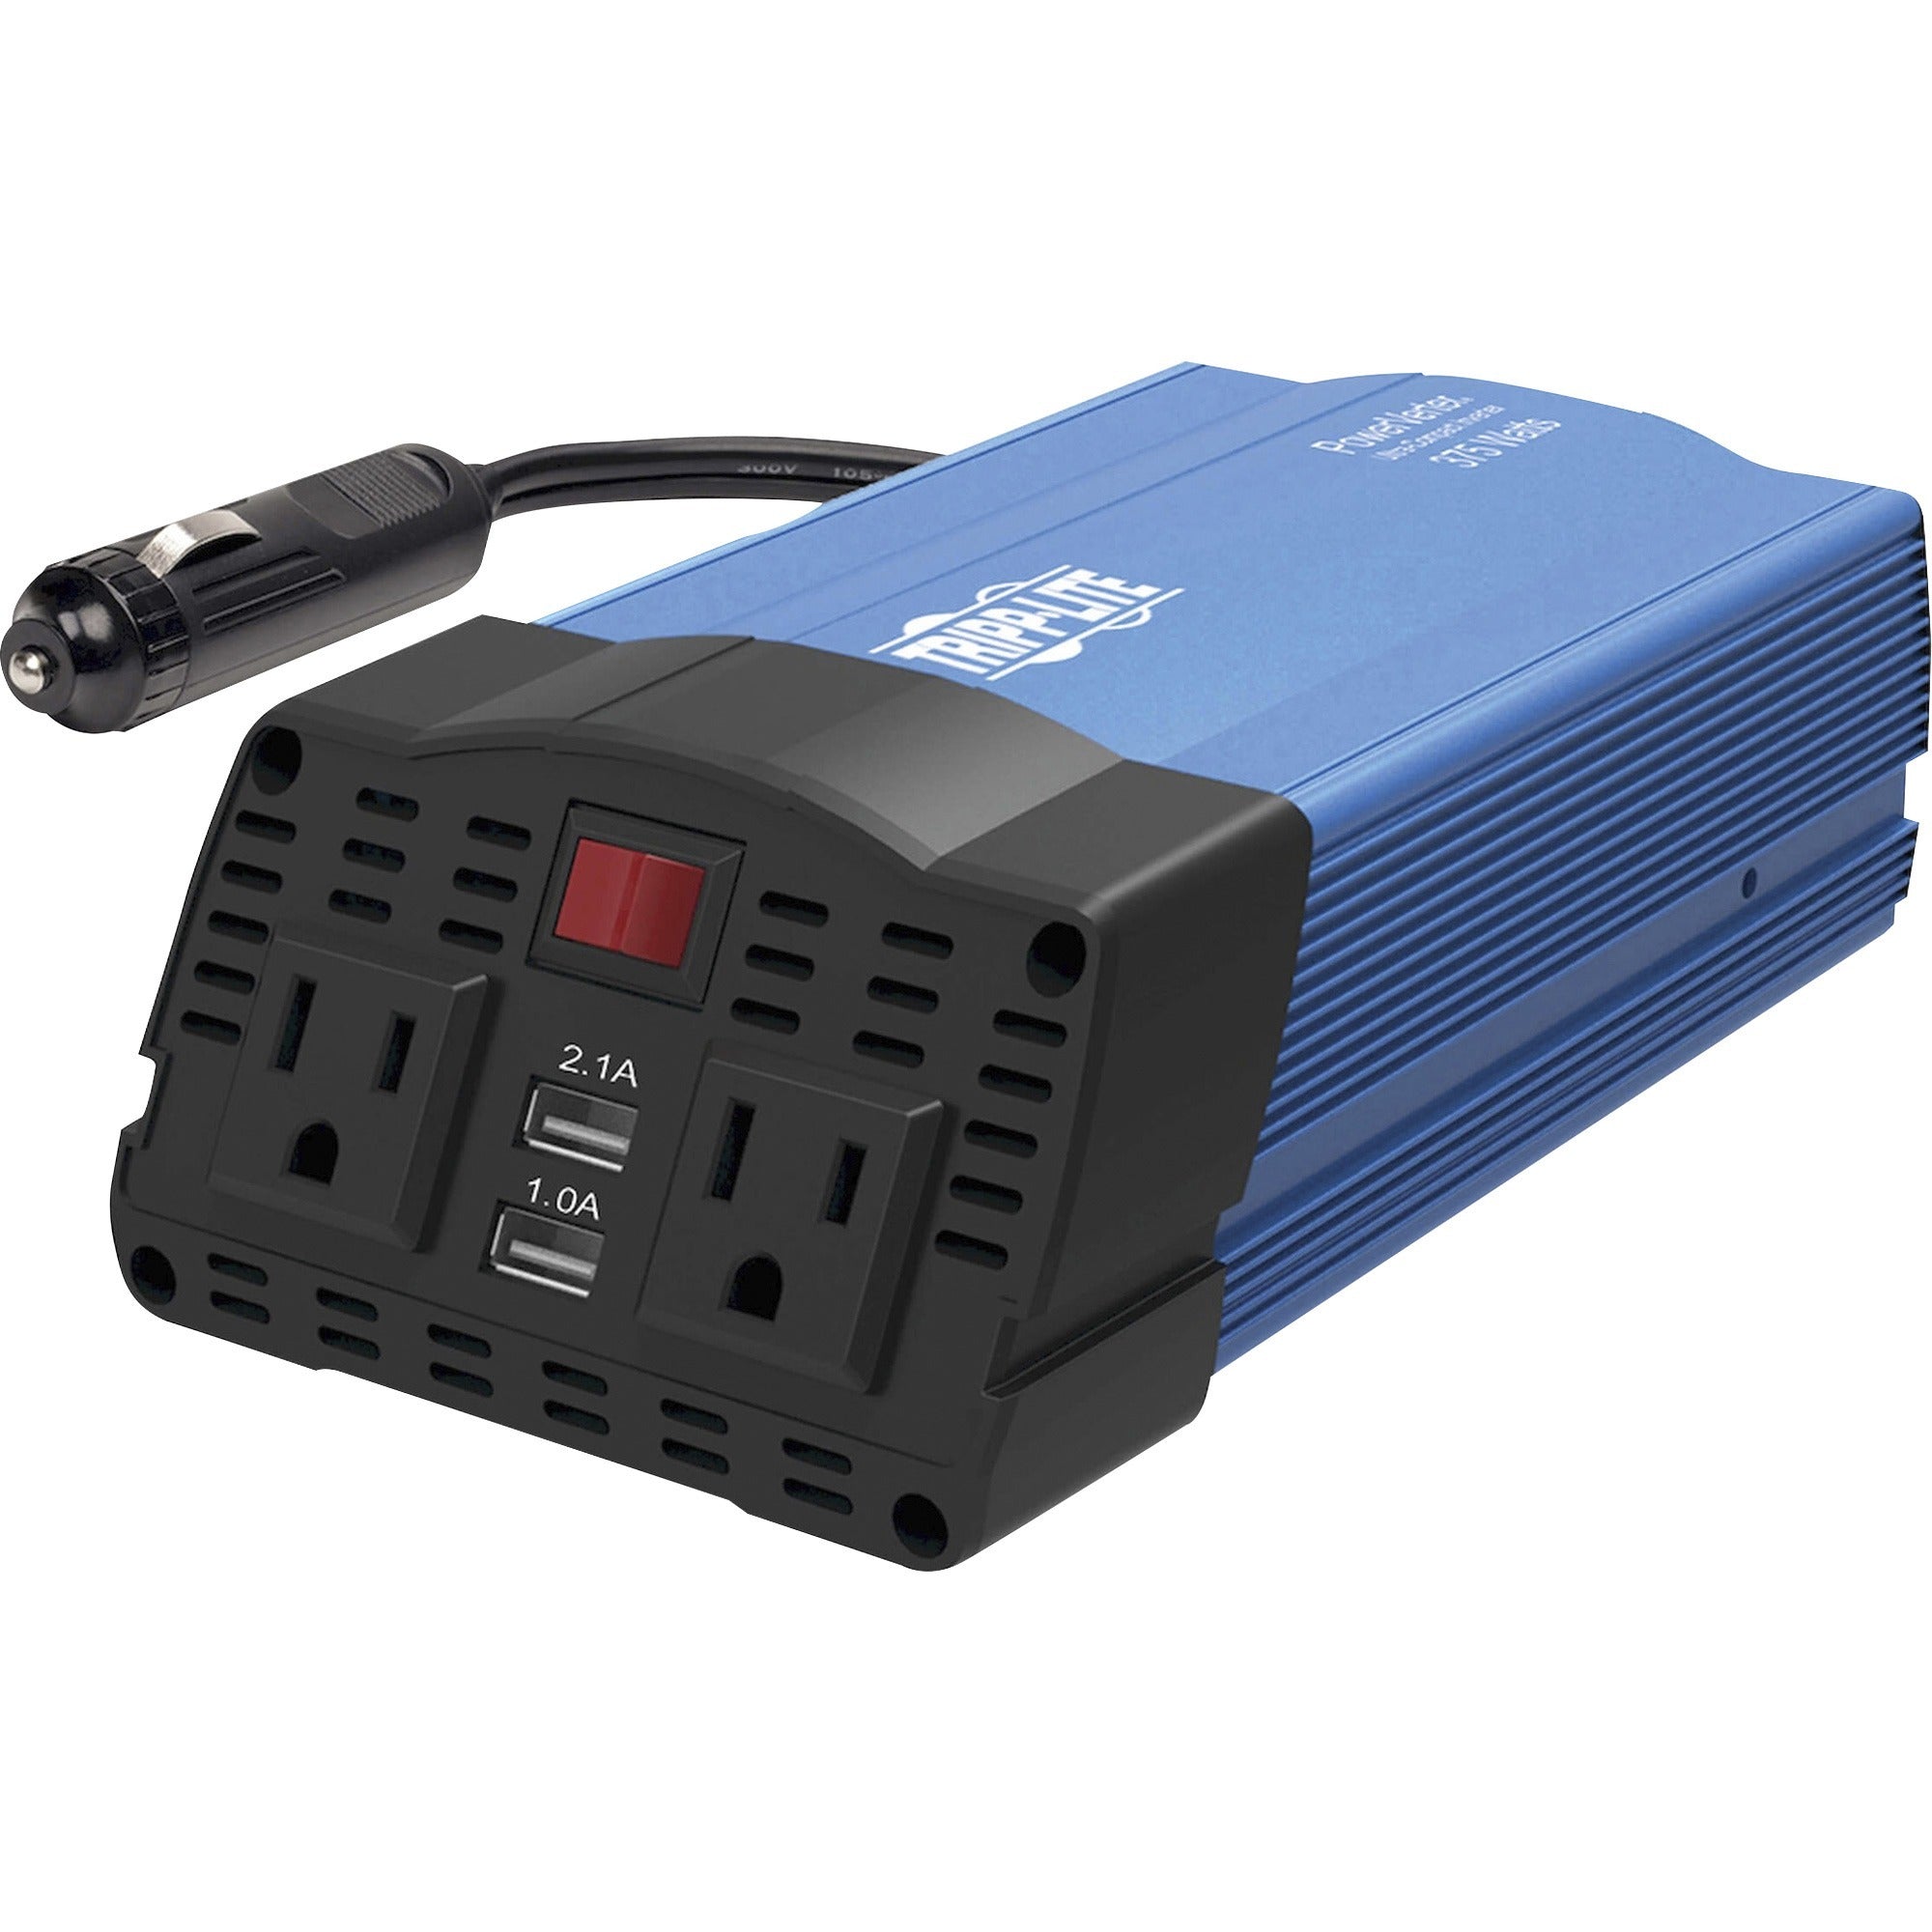 tripp-lite-by-eaton-375w-powerverter-ultra-compact-car-inverter-with-2-ac-outlets-2-usb-charging-ports-and-battery-cables-input-voltage-12-v-dc-output-voltage-120-v-ac-continuous-power-375-w_trppv375usb - 1